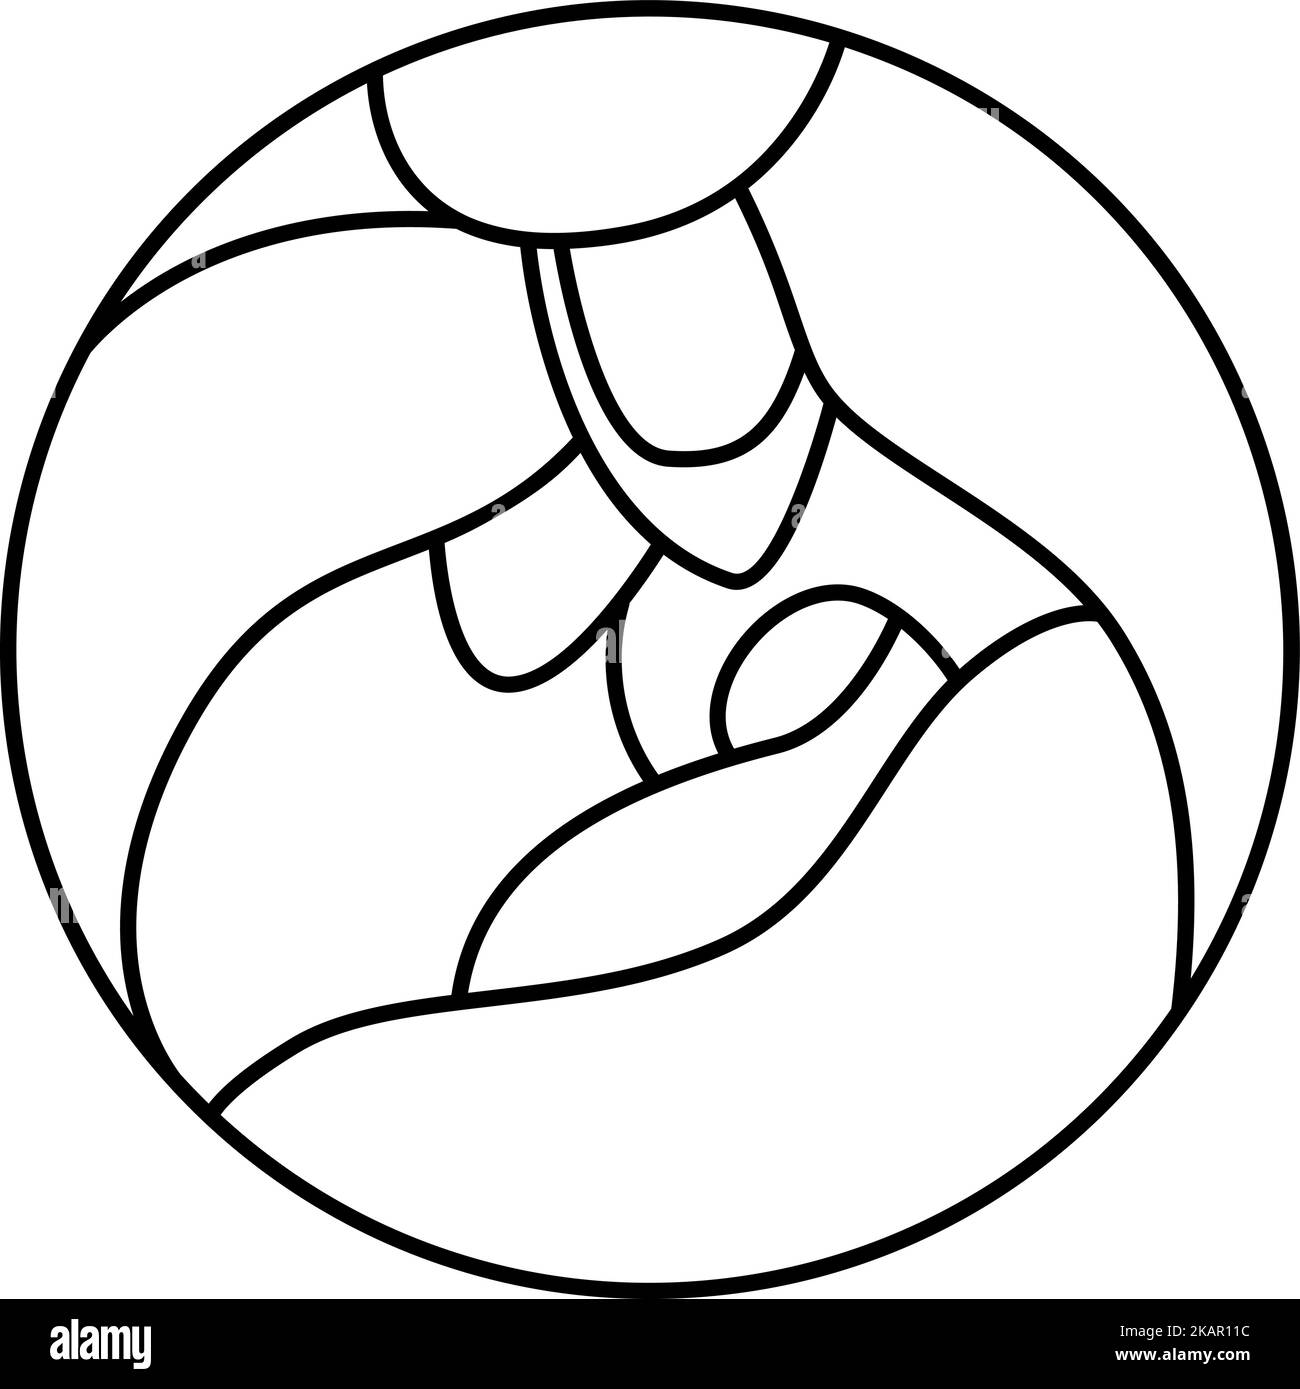 Vector Christmas Christian religious Nativity Scene of baby Jesus with Mary and Joseph in round. Logo icon illustration sketch. Doodle hand drawn with Stock Vector